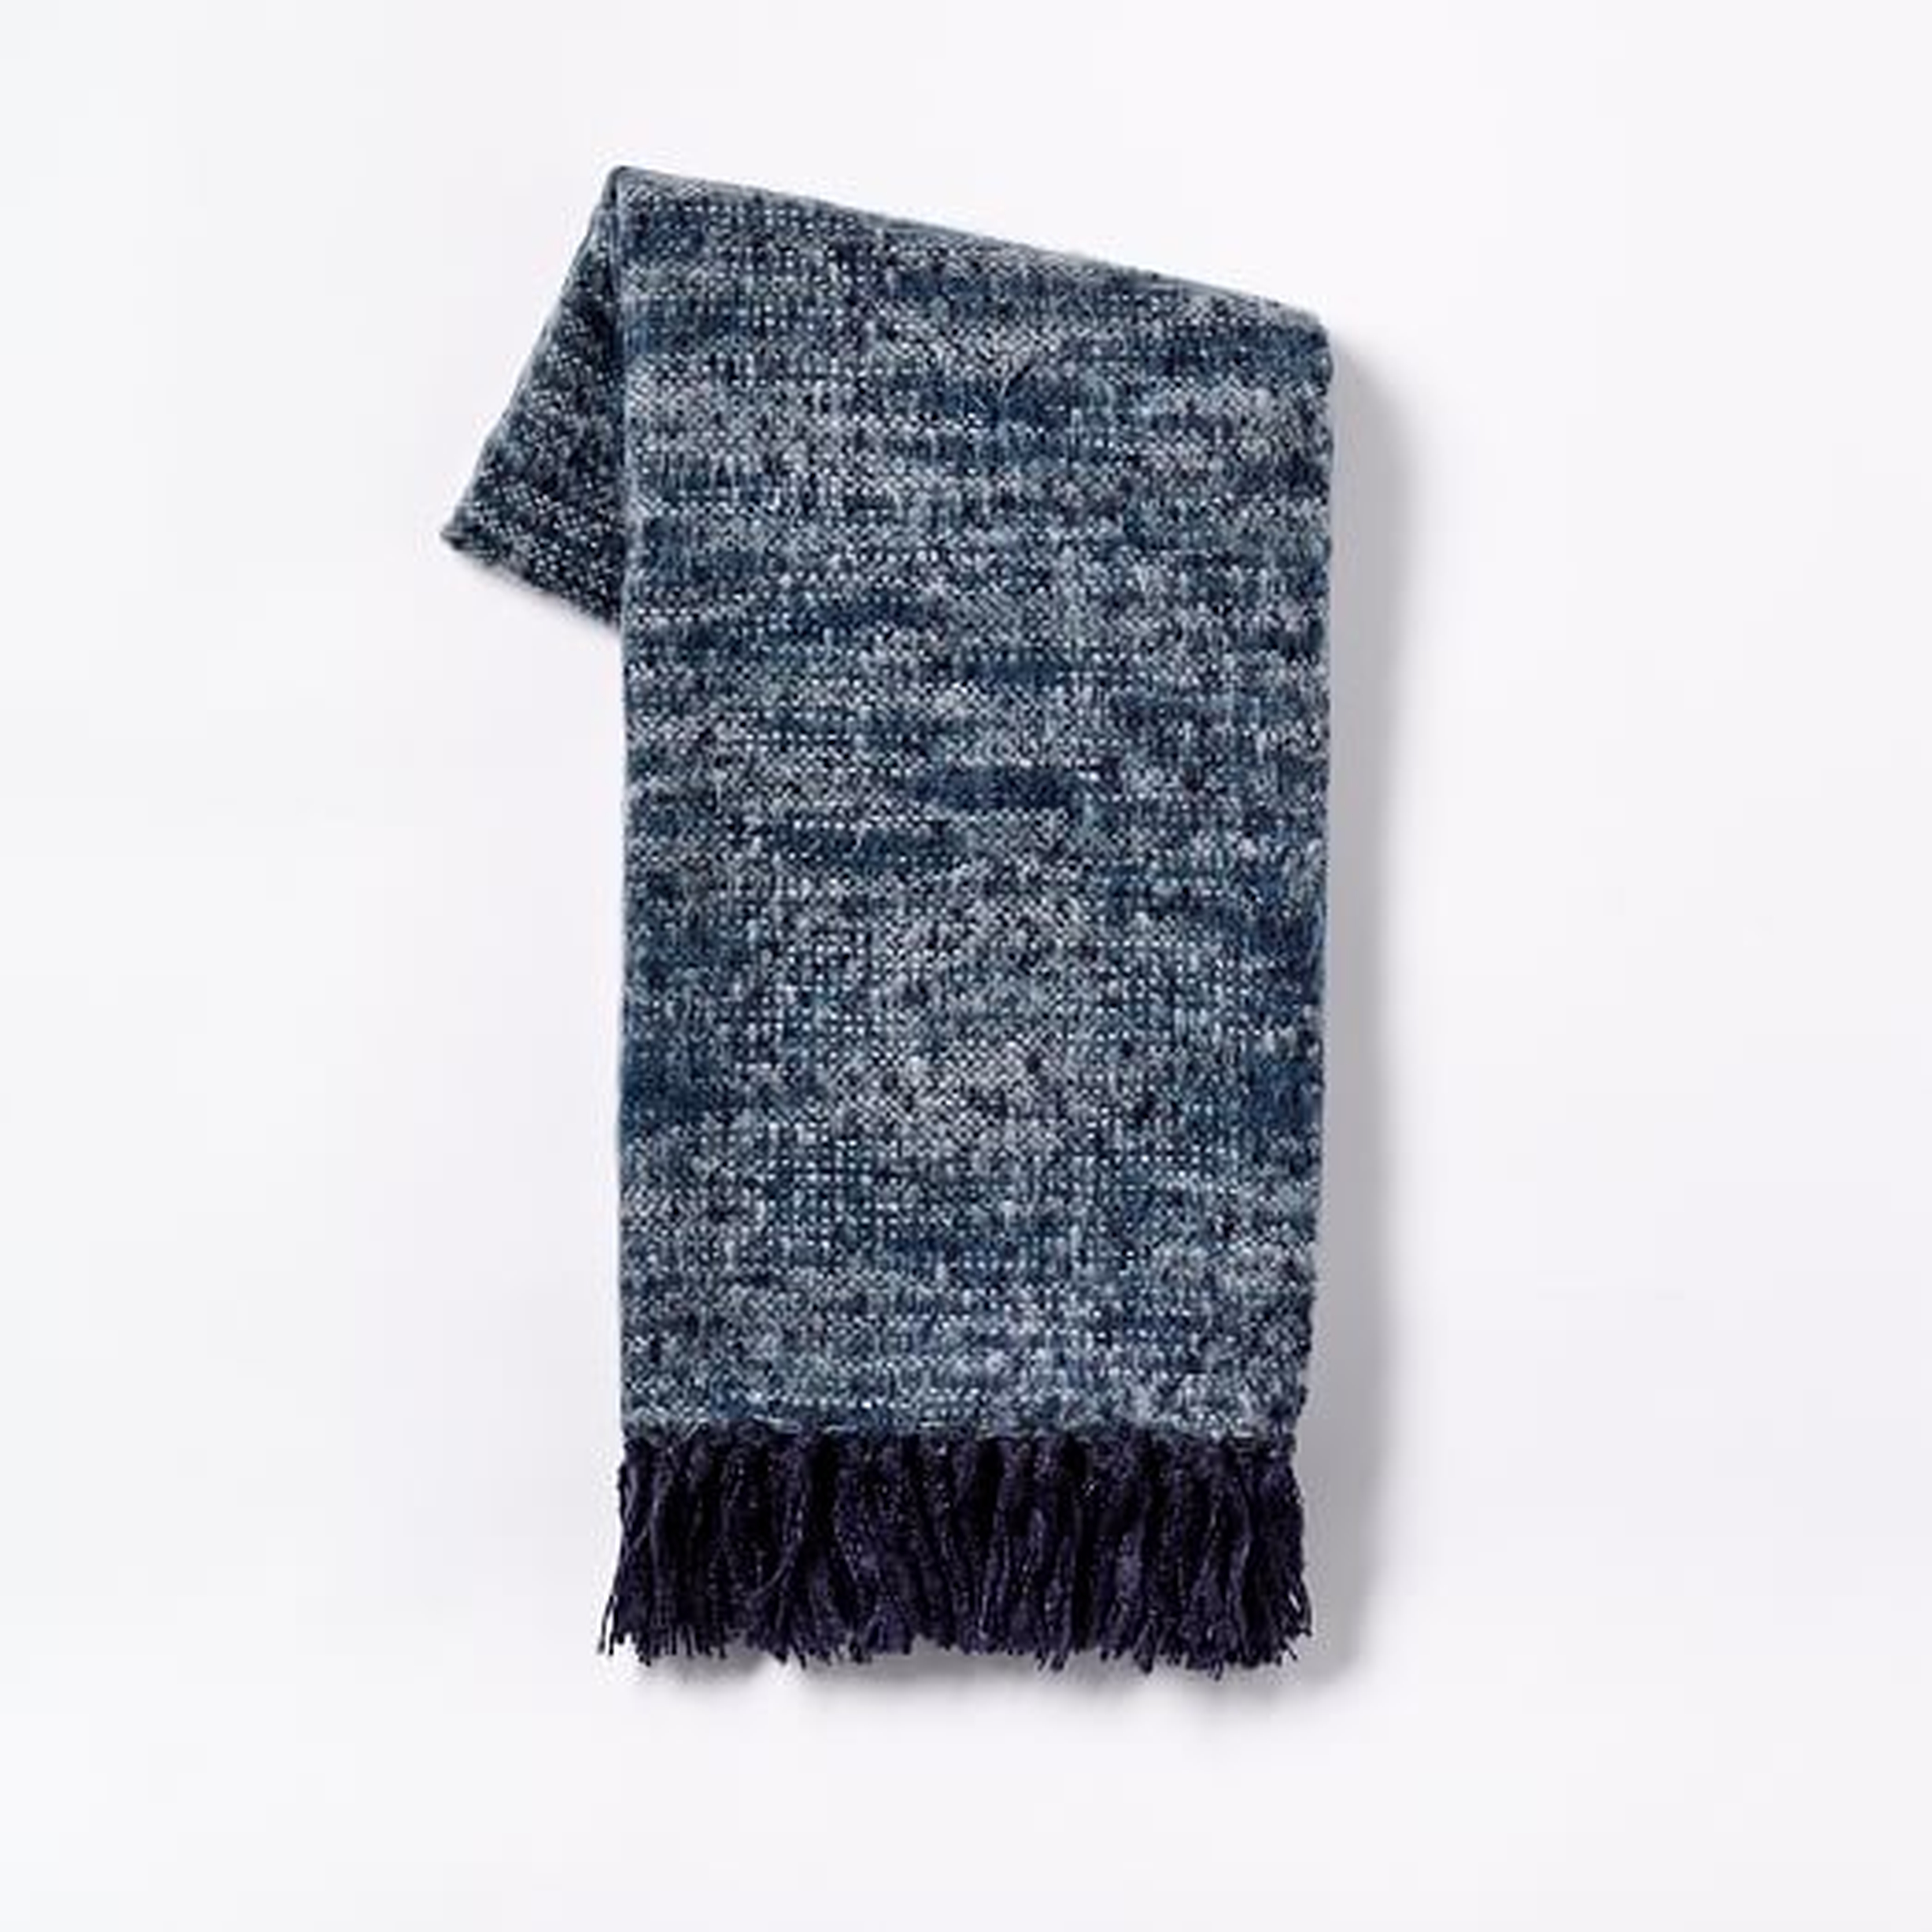 Coziest Throw - Space-Dyed nightshade - West Elm